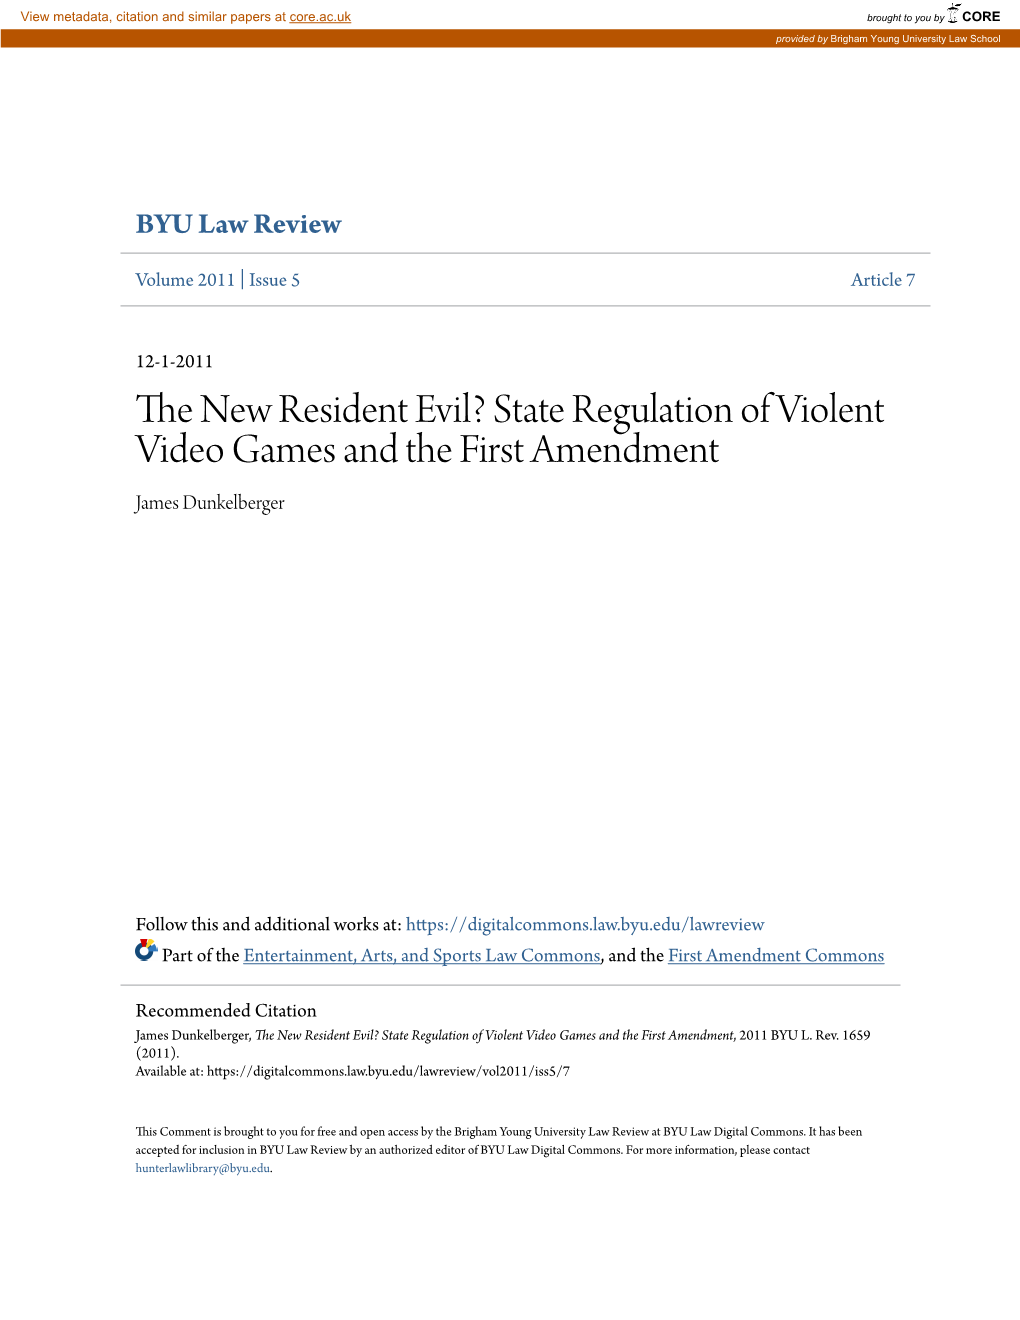 The New Resident Evil? State Regulation of Violent Video Games and the First Amendment, 2011 BYU L